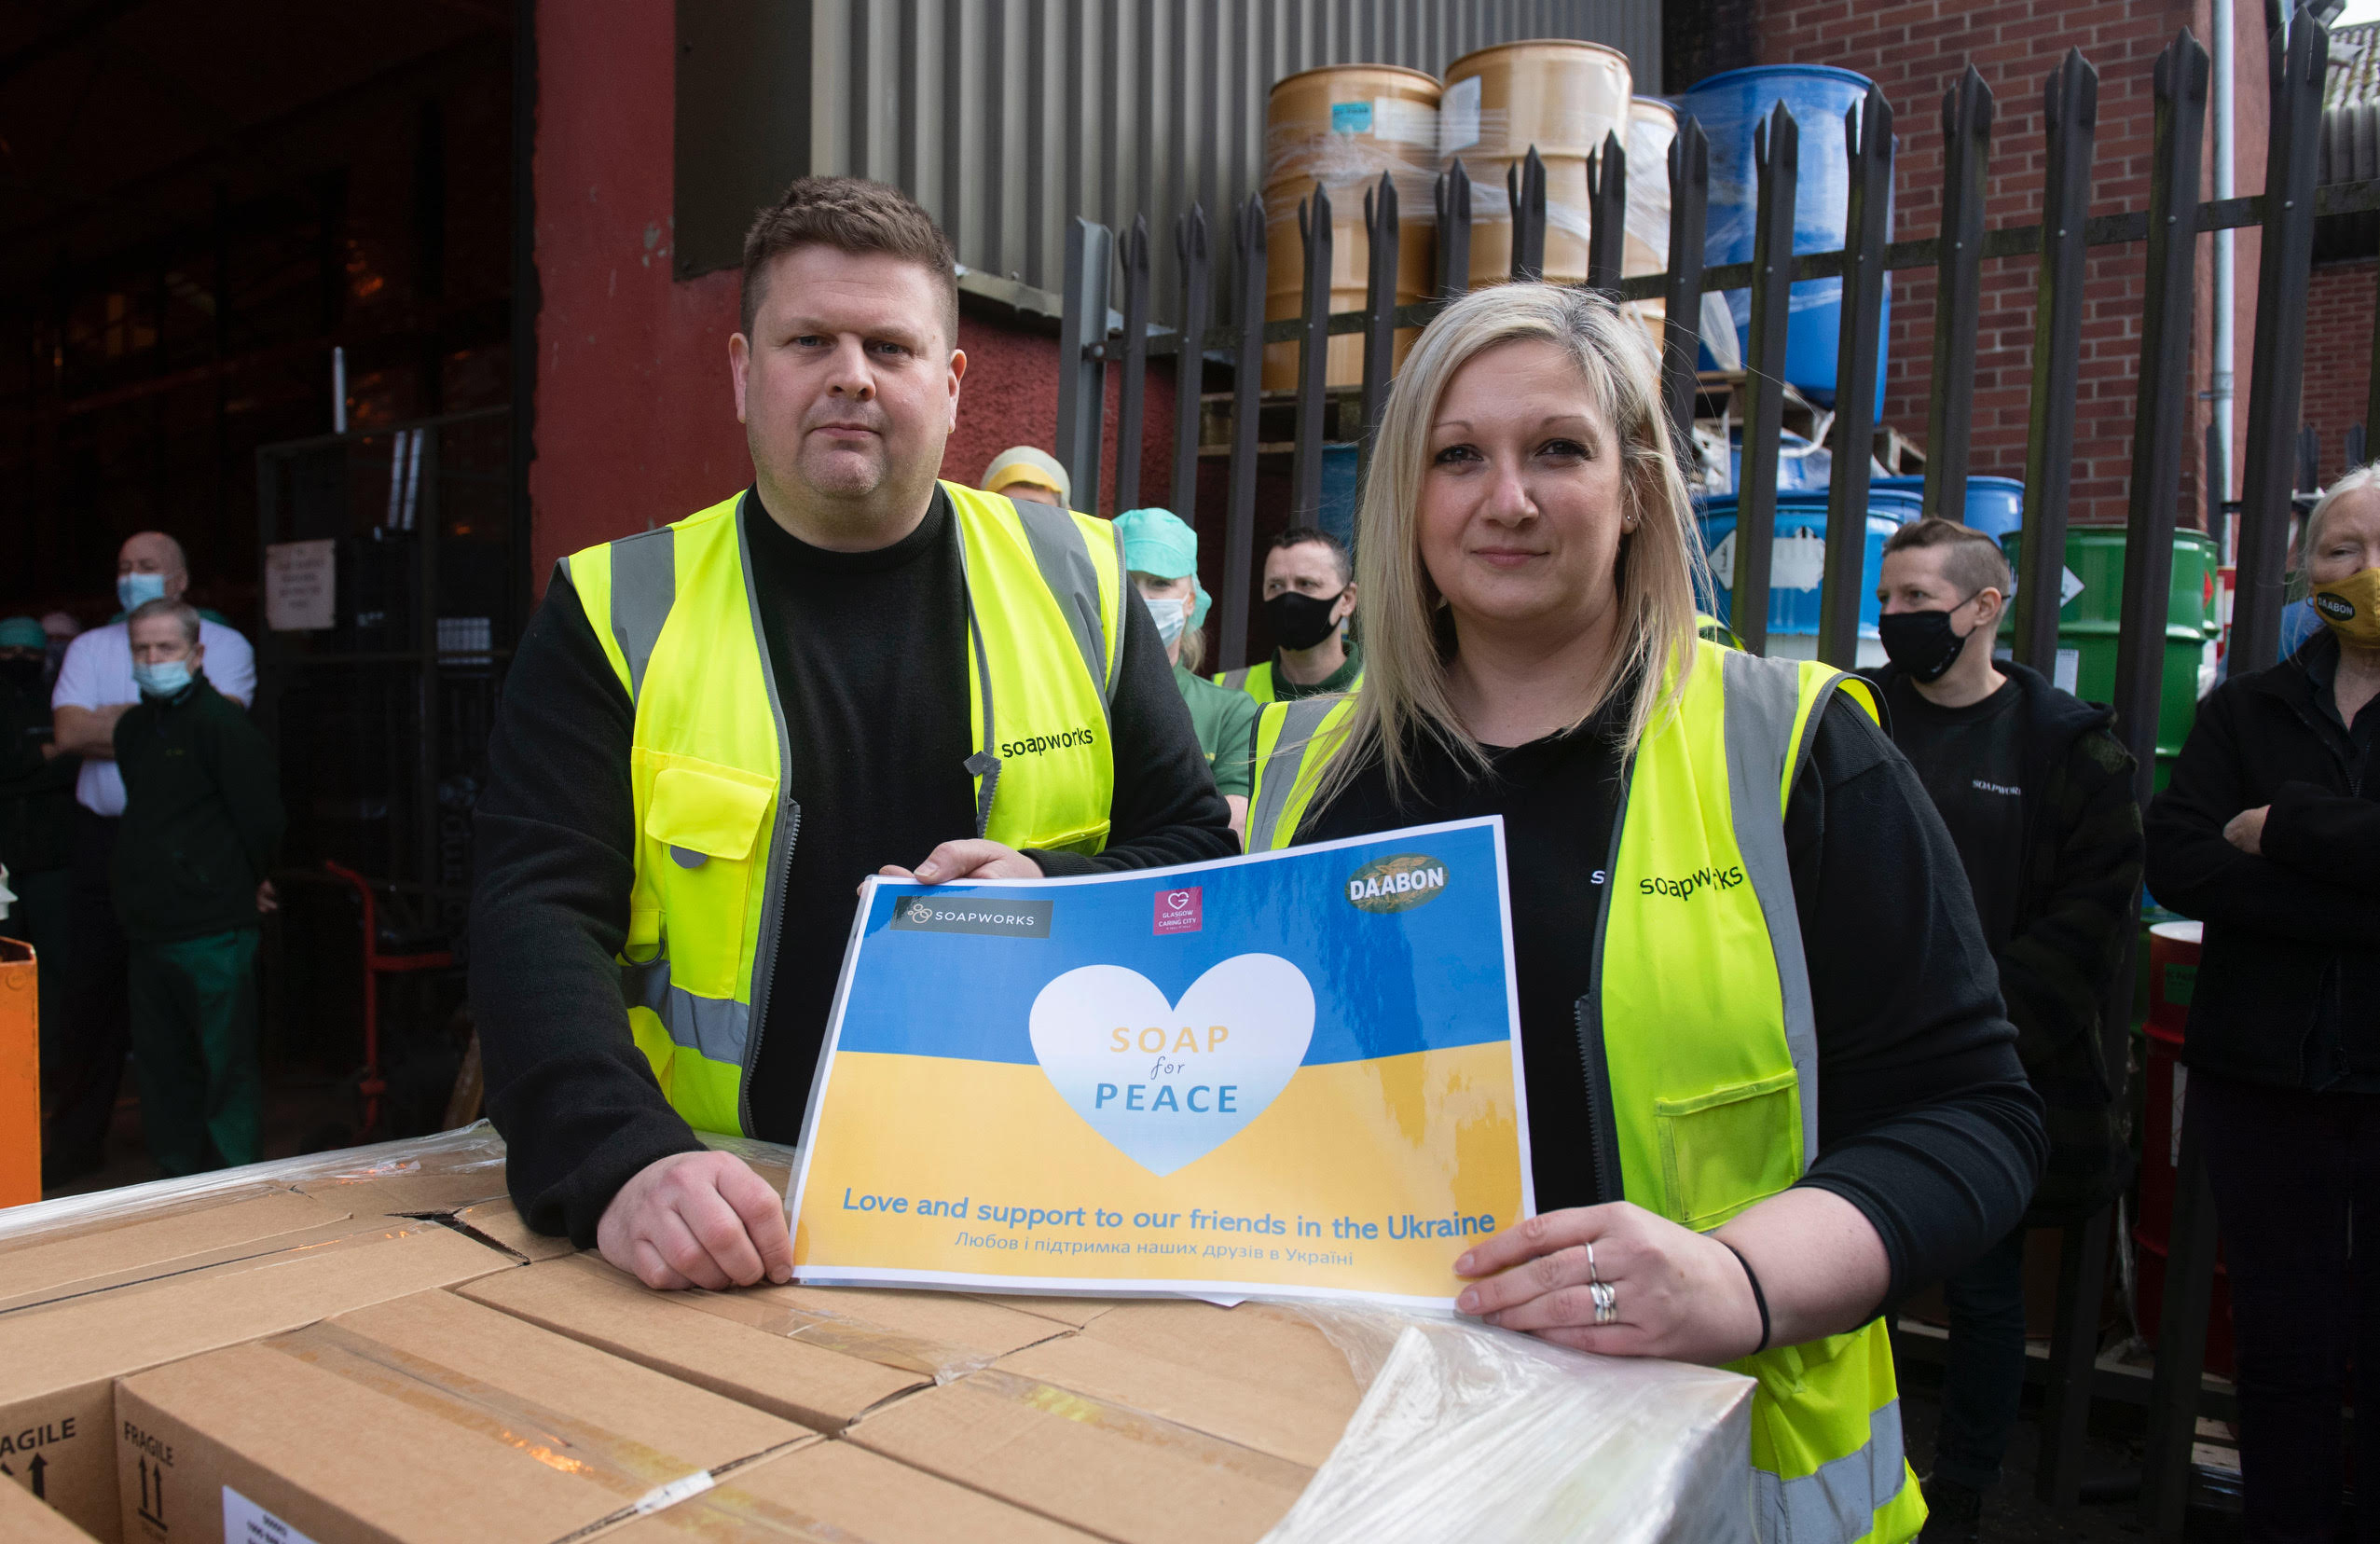 Glasgow The Caring City hails unbelievable response to Ukraine appeal